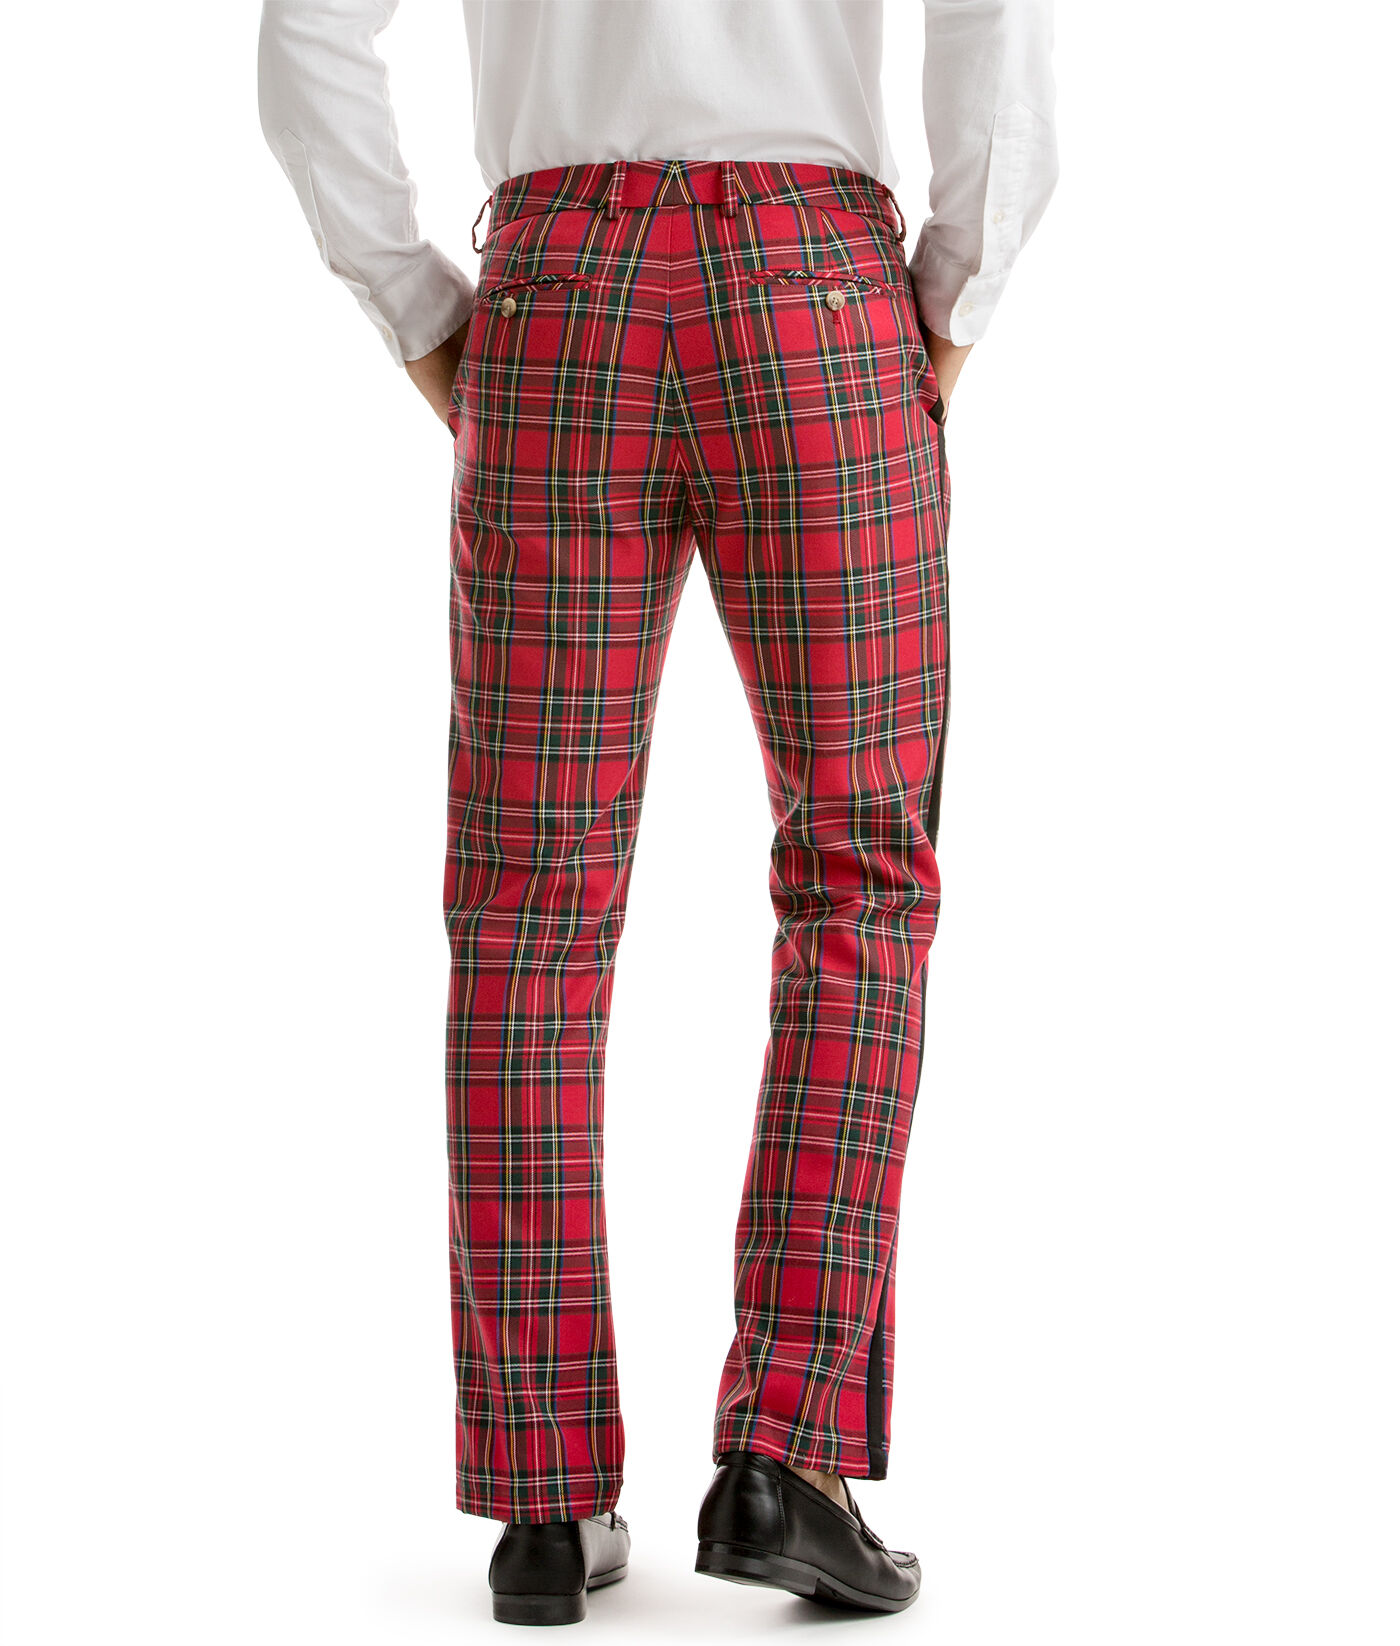 Red Plaid Printed Slim Fit Jeans For Men Trendy Plus Size Straight Tartan  Trousers Mens J230814 From Mauch, $15.29 | DHgate.Com